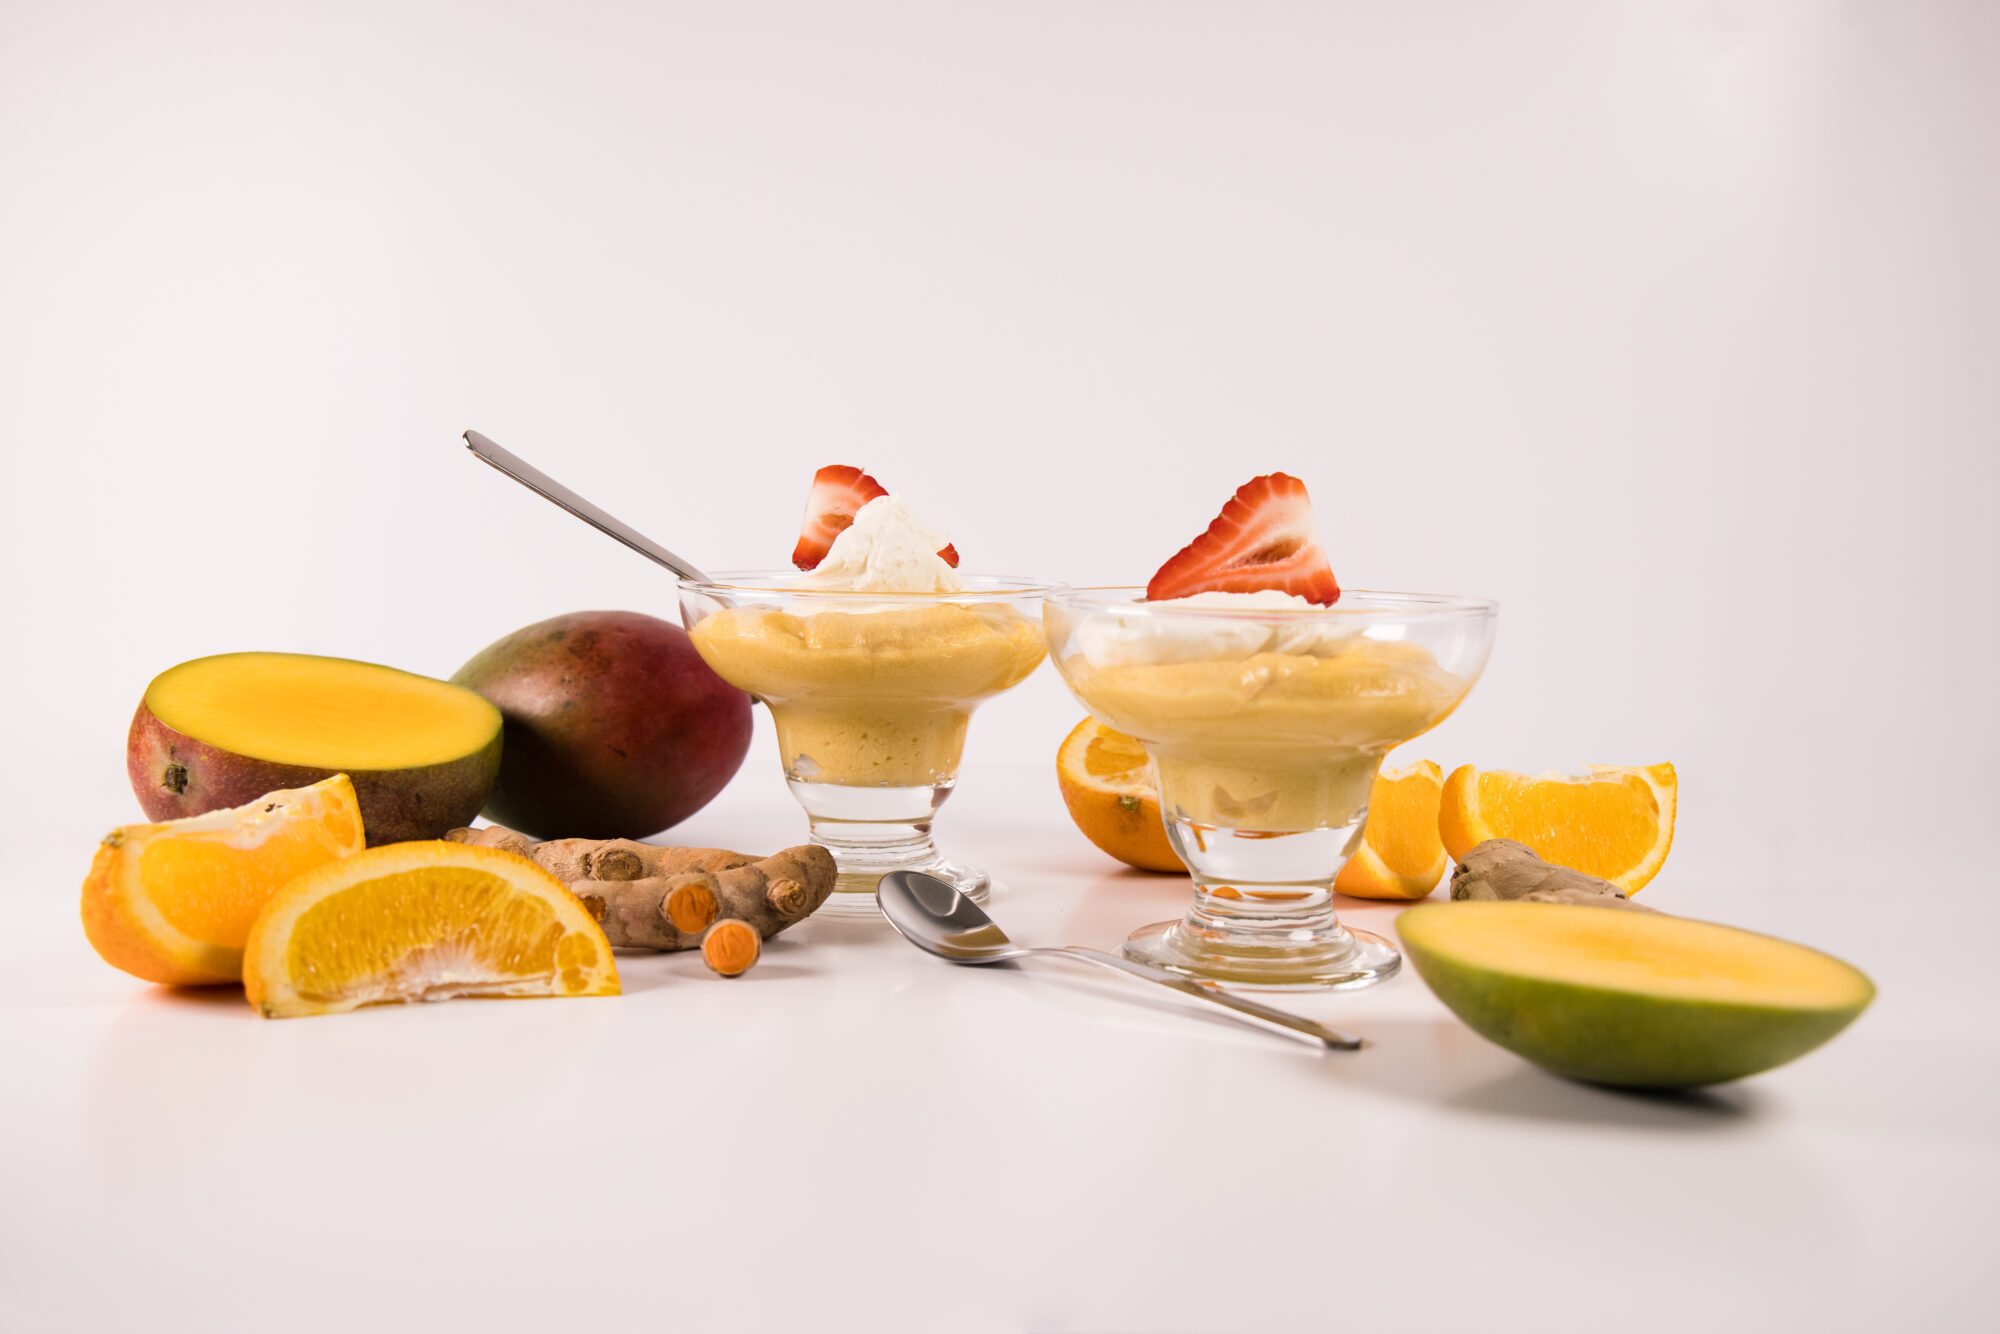 Two short mousse cups filled with Mango Mousse, topped with cream and a strawberry. Desserts are surrounded by ginger, spices and mangoes.